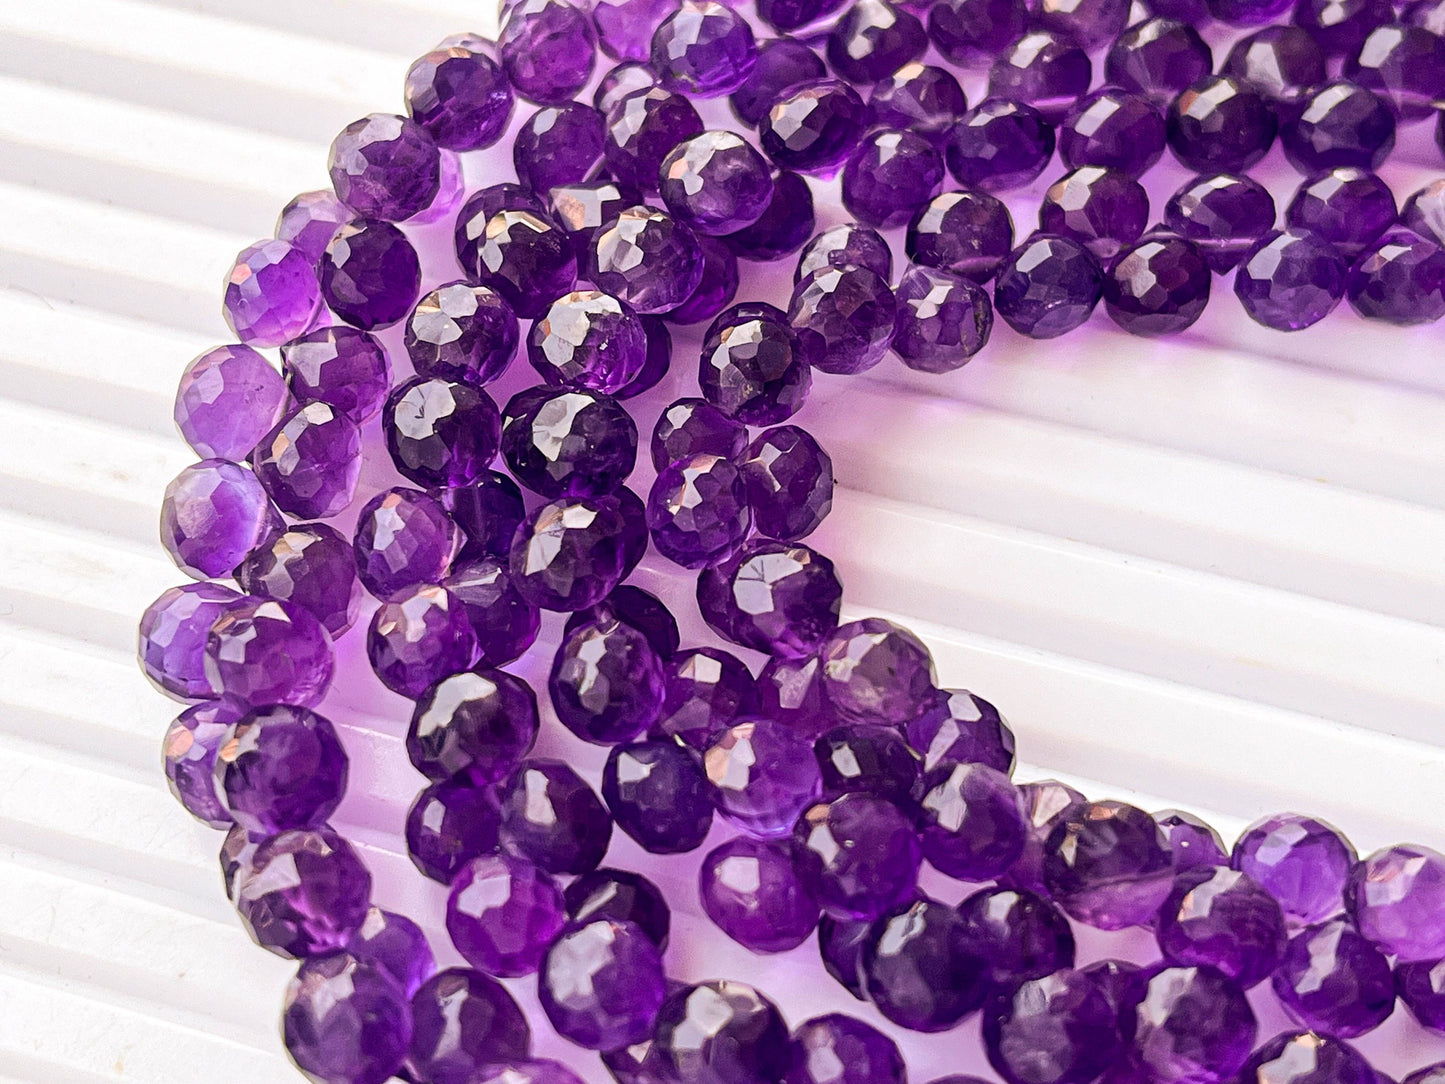 Natural Purple Amethyst Micro faceted Onion shape Drops, Amethyst gemstone, Amethyst teardrops, Amethyst Beads, Amethyst drops, 6mm to 7mm